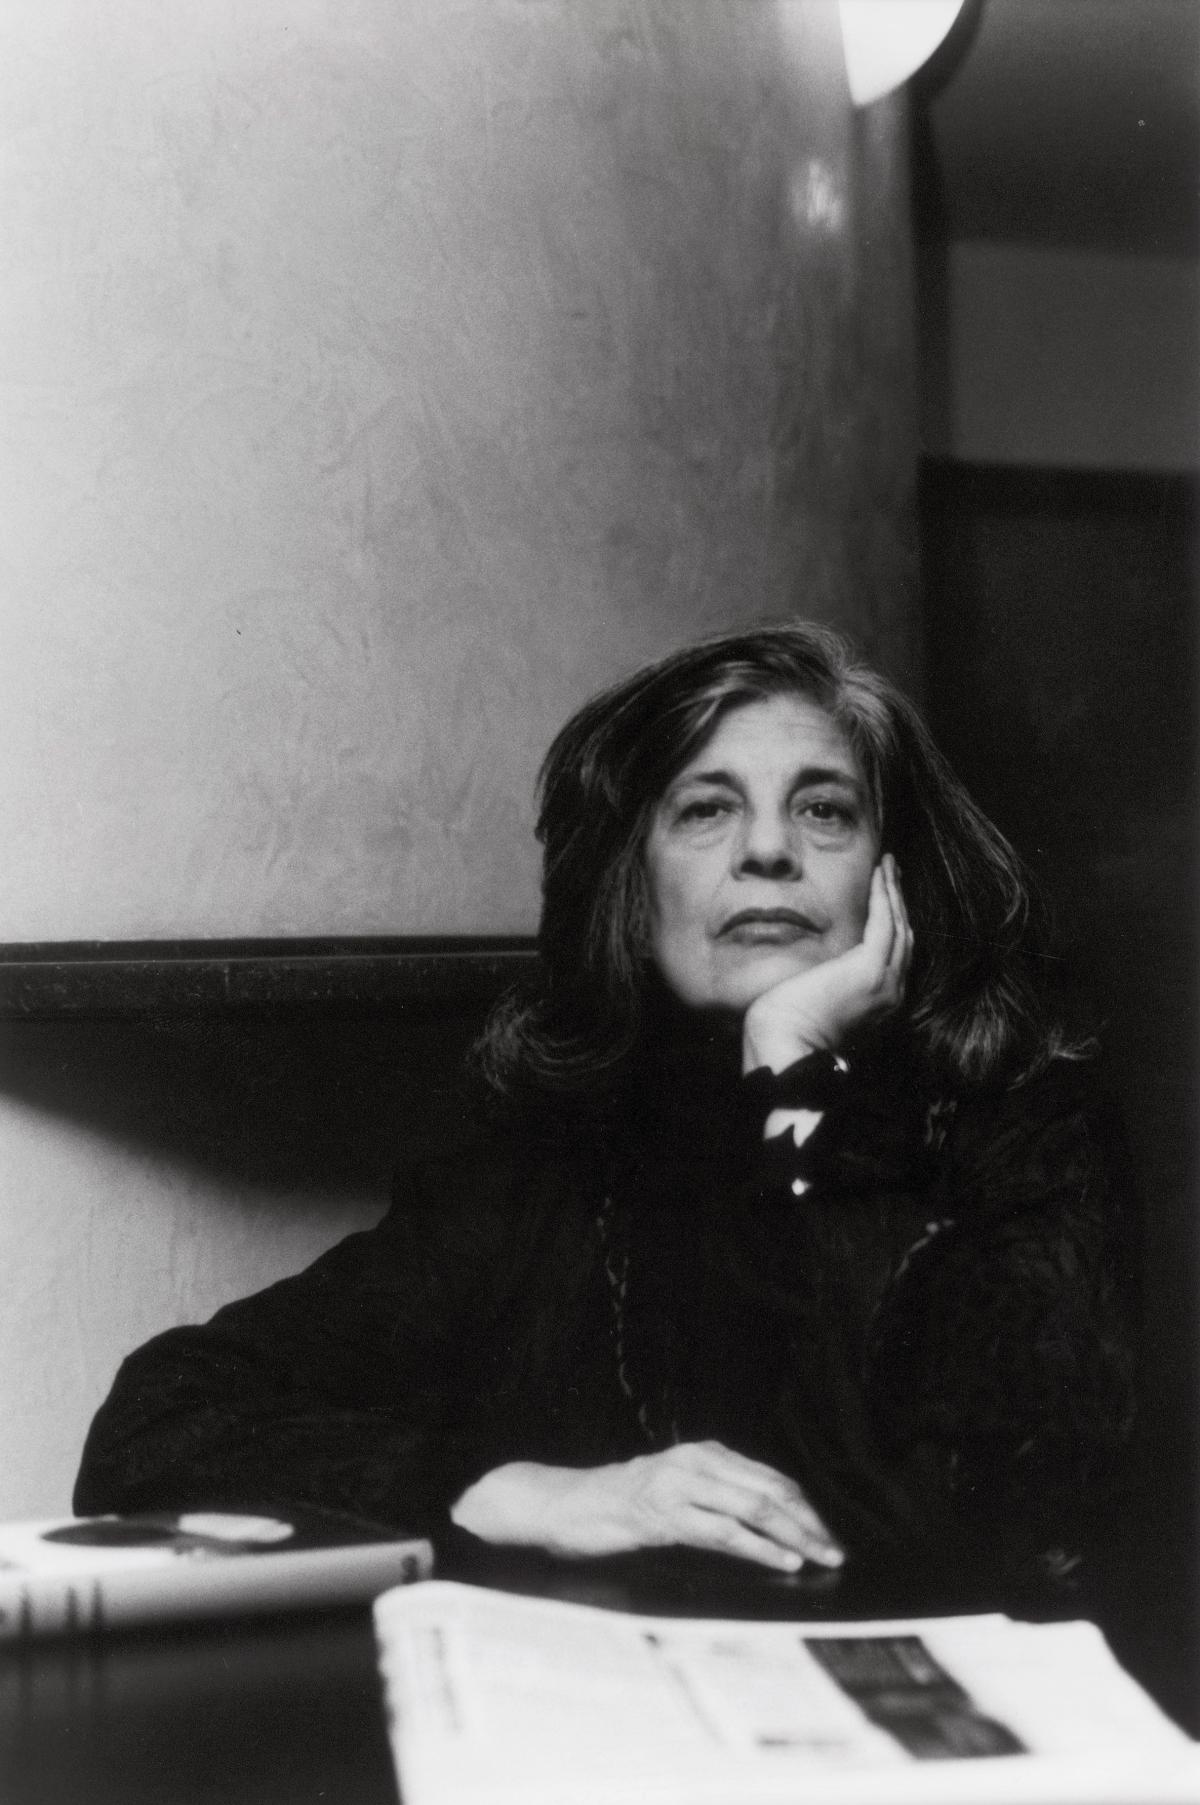 Sontag resting her chin in her hand, seated at a desk